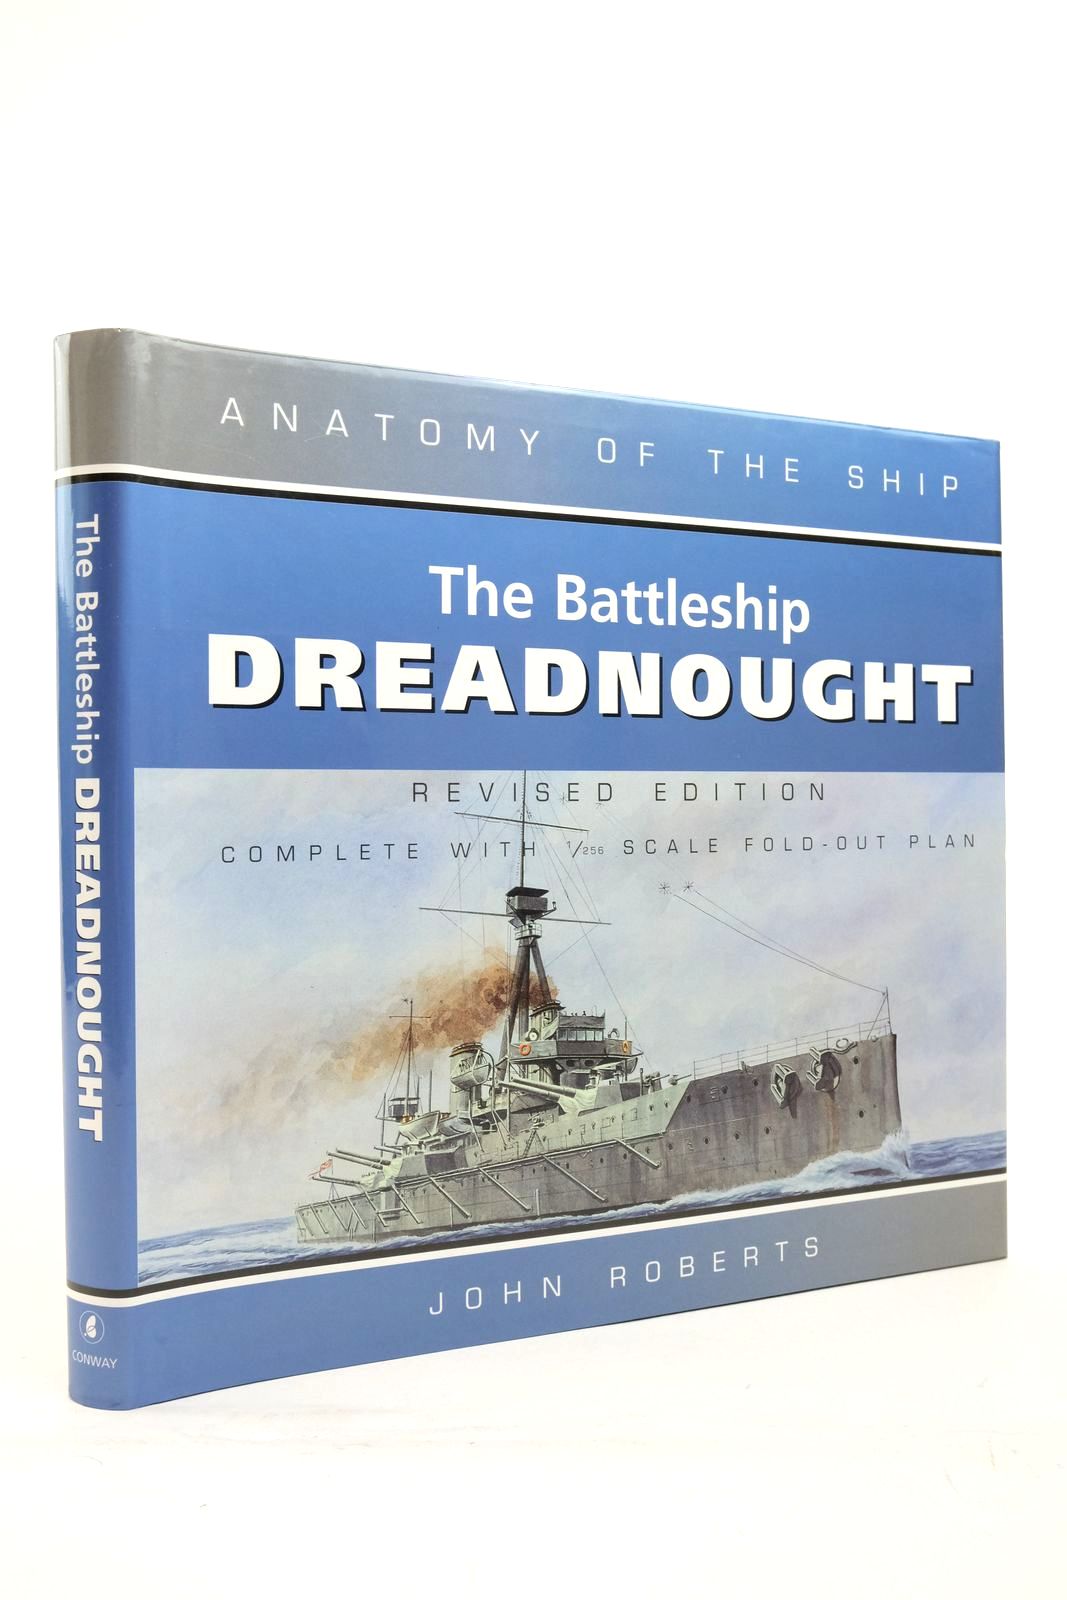 Photo of ANATOMY OF THE SHIP: THE BATTLESHIP DREADNOUGHT written by Roberts, John published by Conway Maritime Press (STOCK CODE: 2137843)  for sale by Stella & Rose's Books